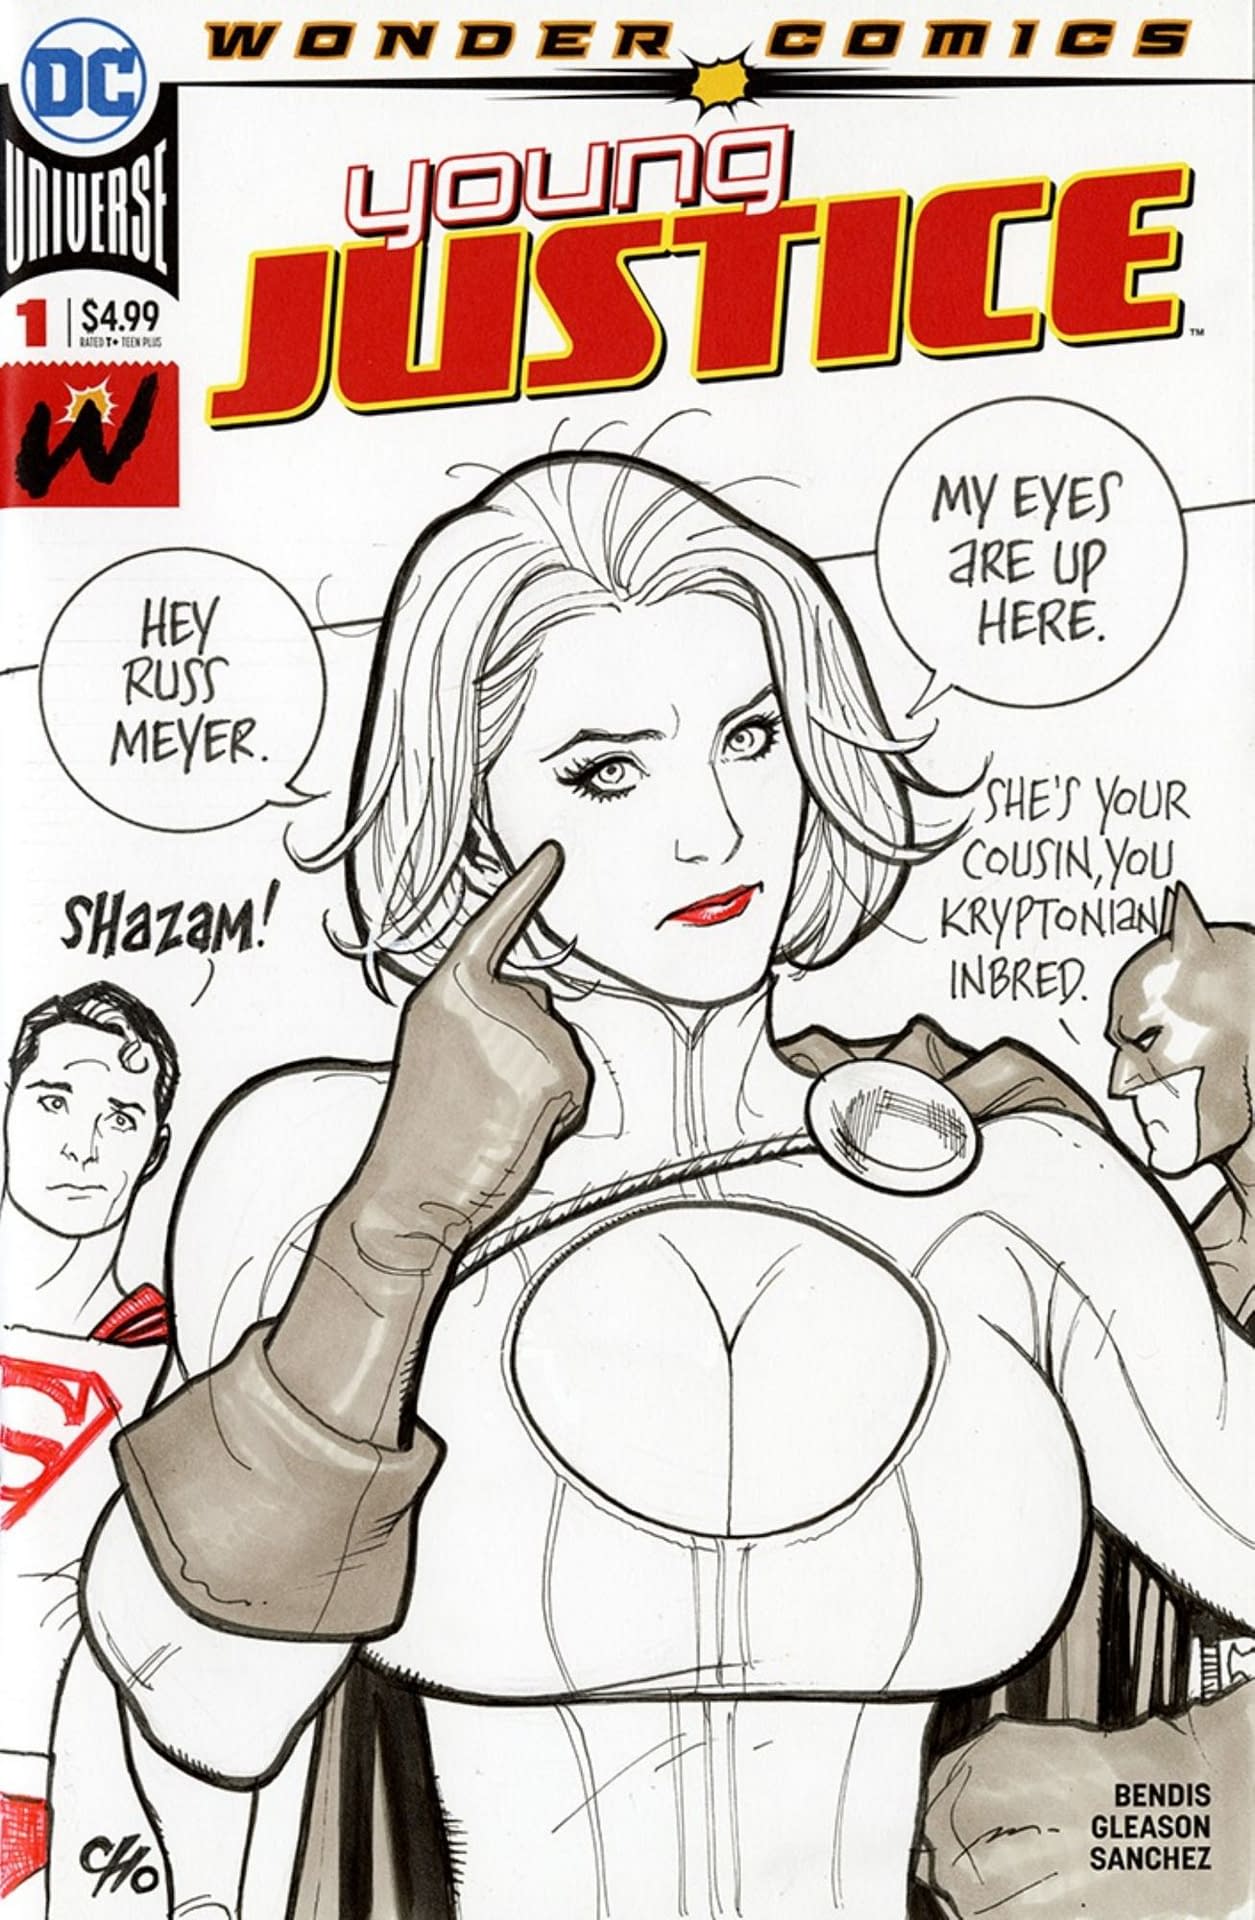 Frank Cho Outrage Commissions And Sketch Covers For San Diego Comic Con